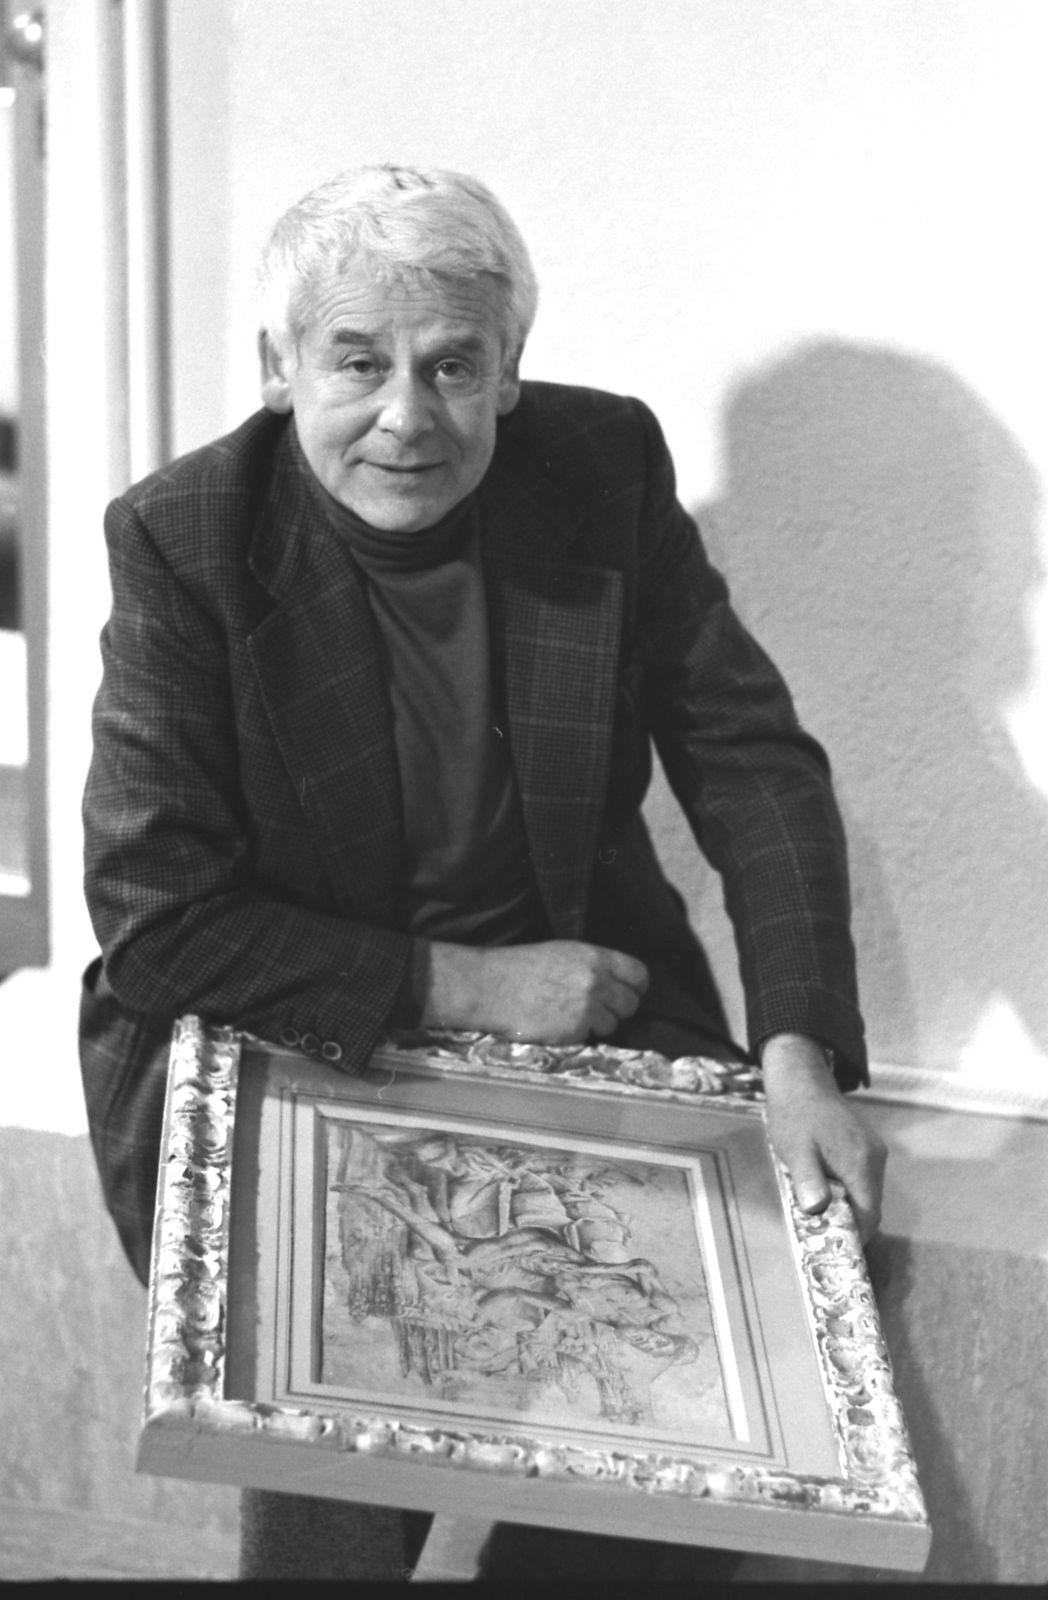 Jan Krugier with a drawing